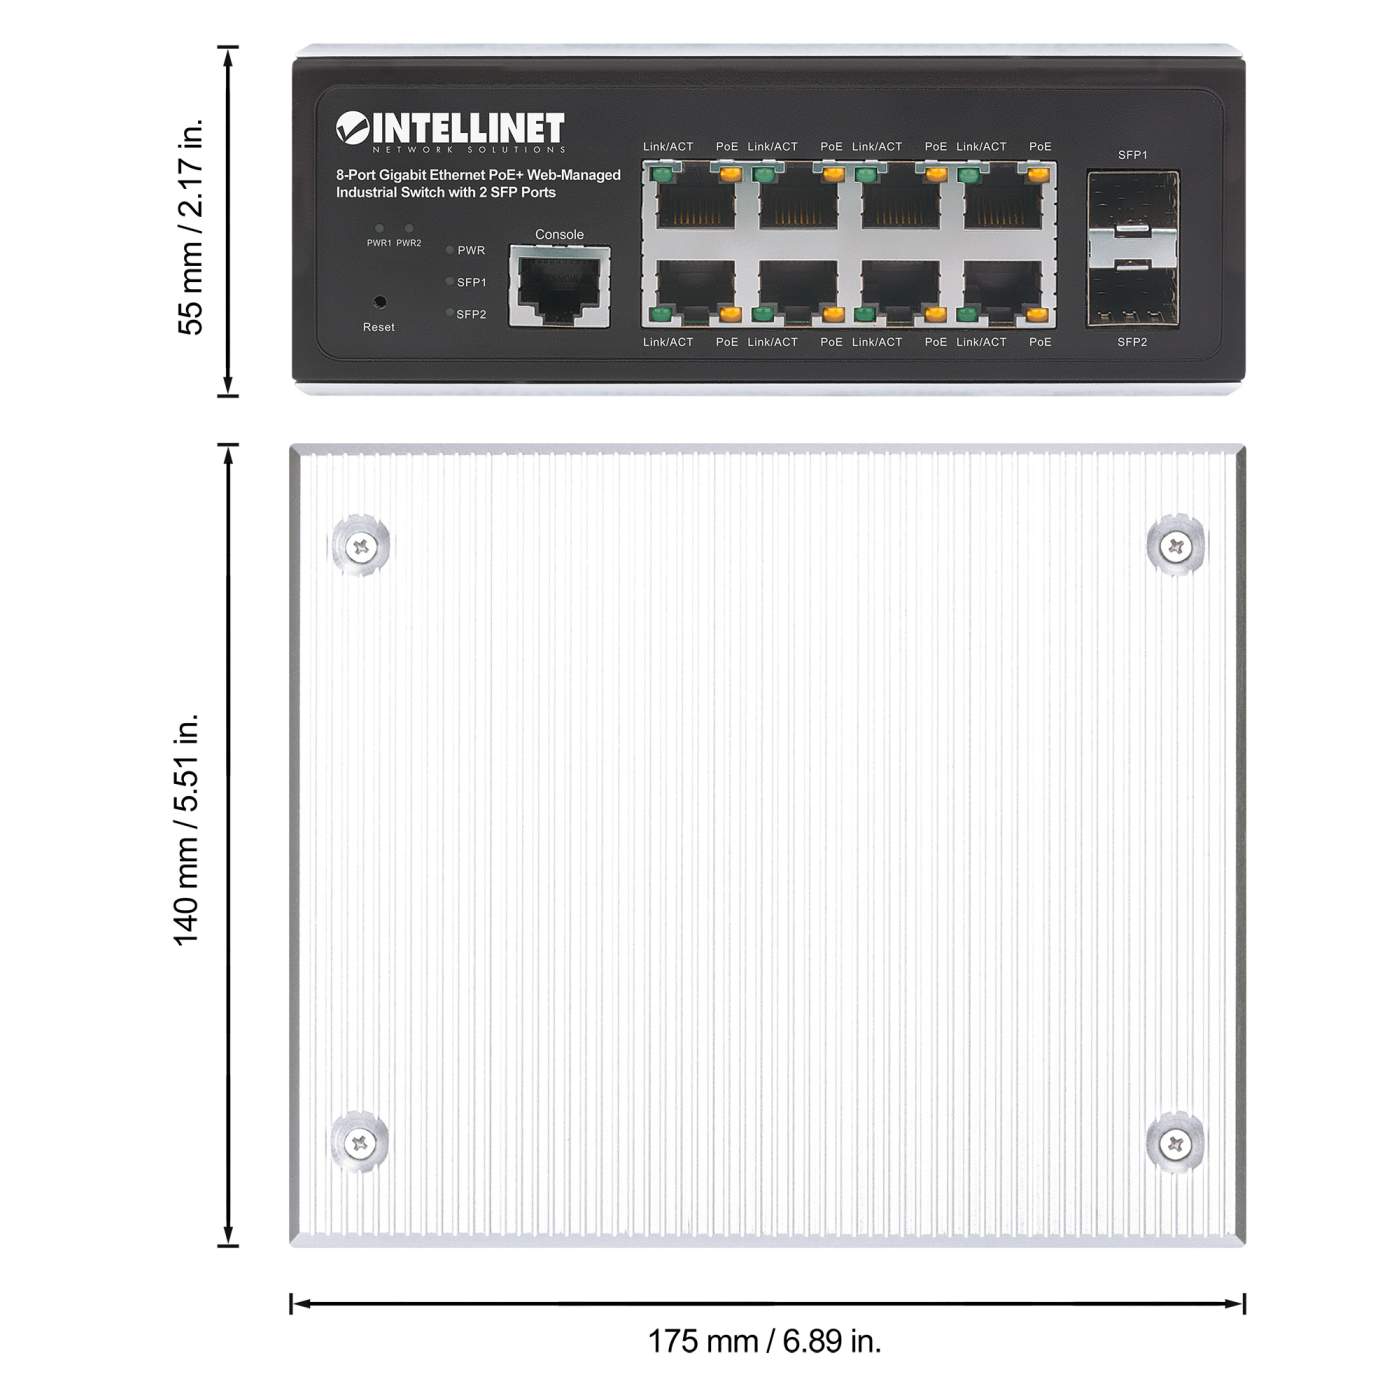 Industrial 8-Port Gigabit Ethernet PoE+ Layer 2+ Web-Managed Switch with 2 SFP Ports Image 7